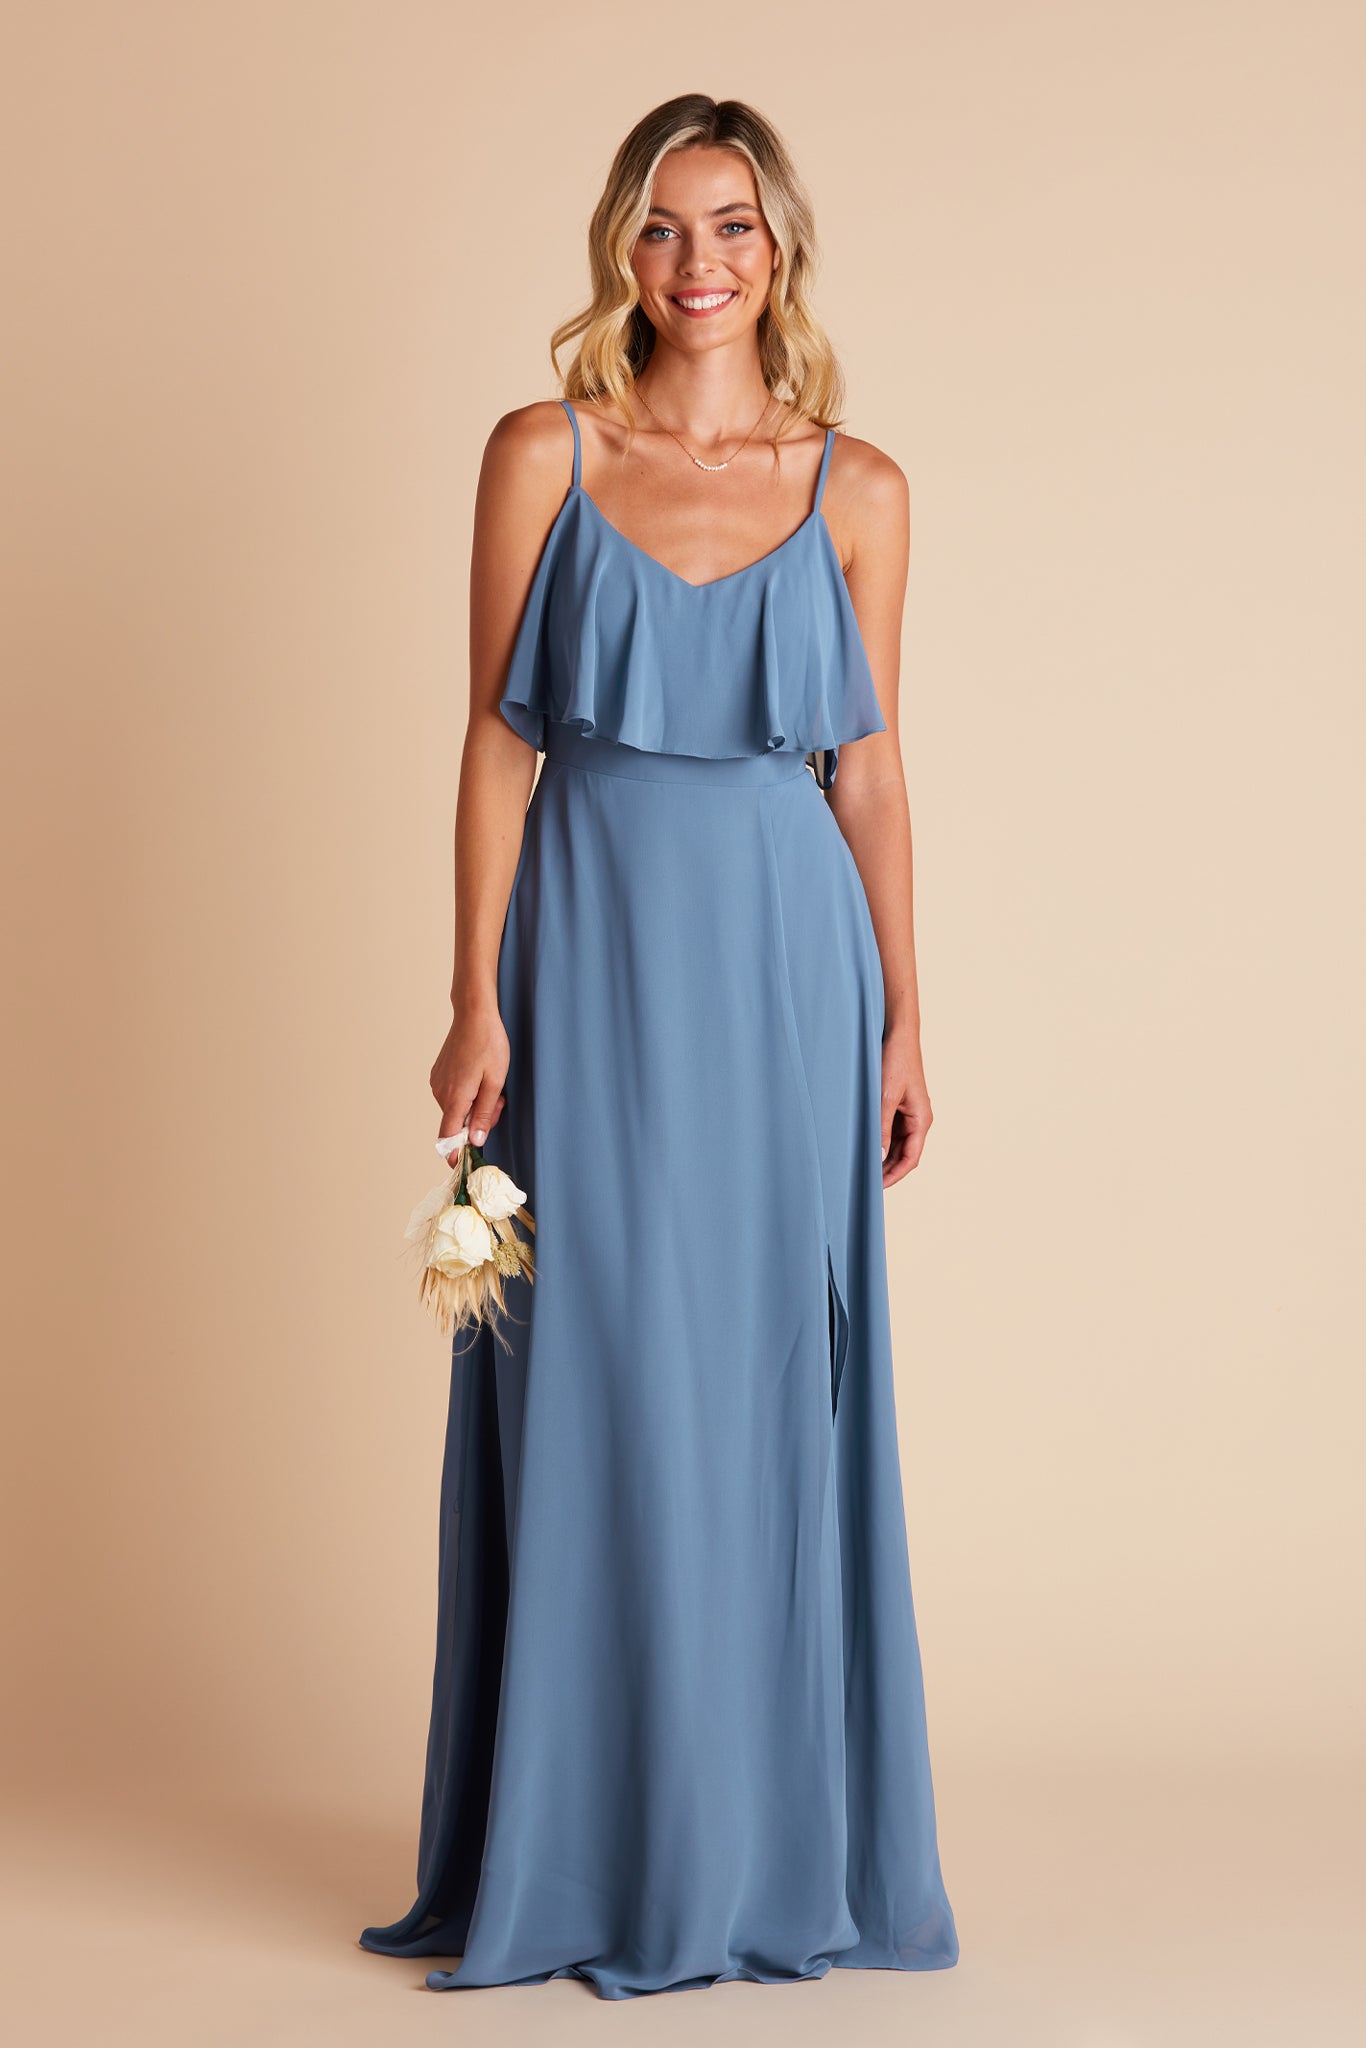 Jane convertible bridesmaid dress in twilight blue chiffon by Birdy Grey, front view